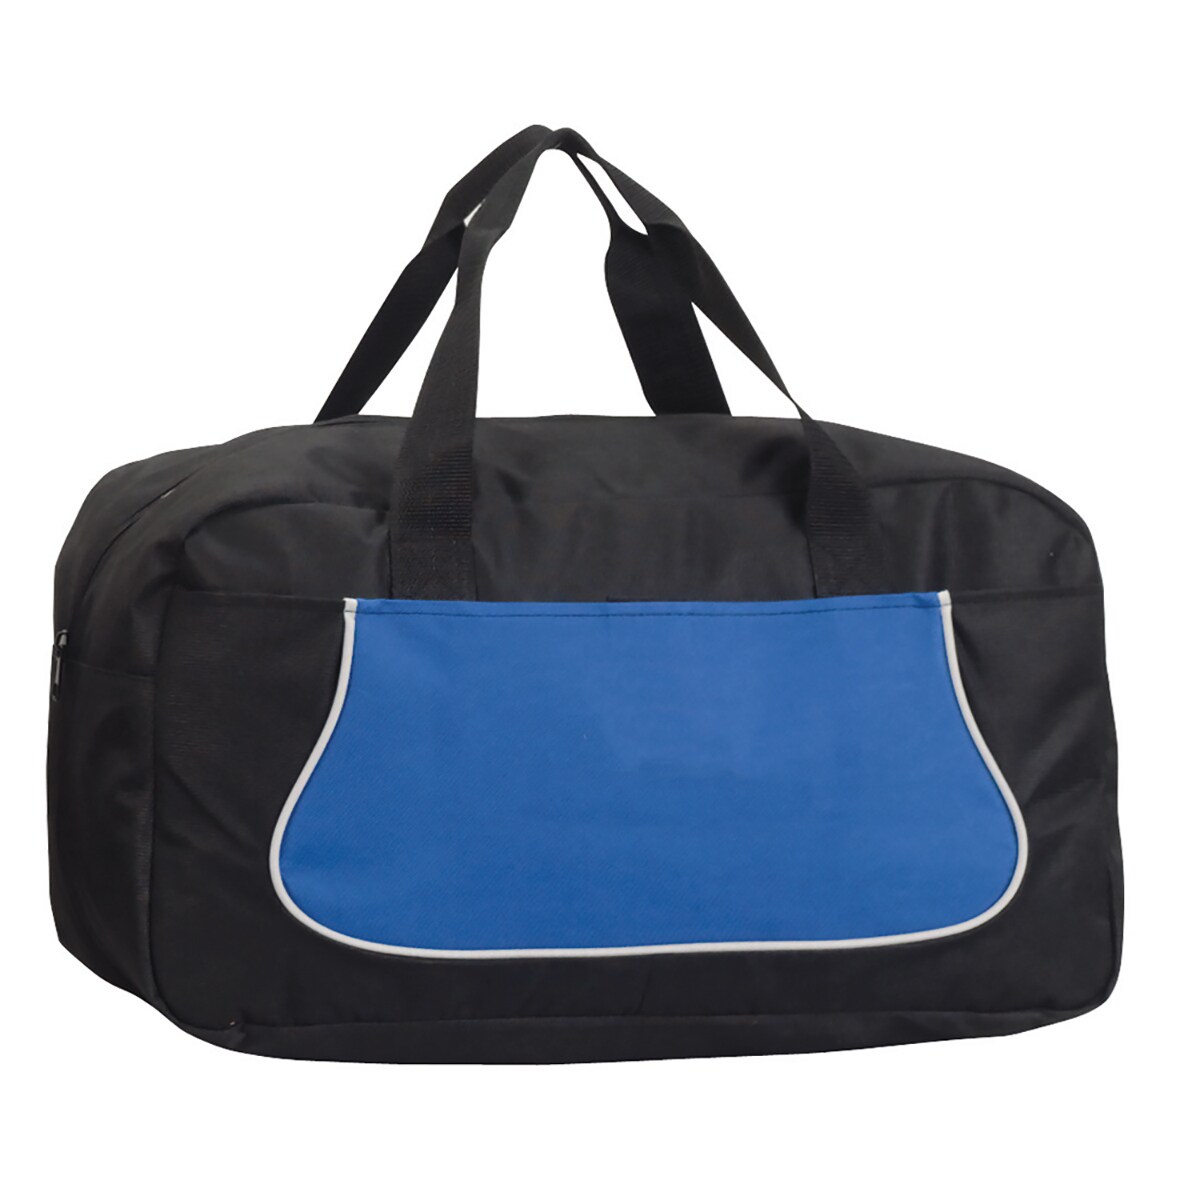 Goodhope  Recycollection 18-inch Duffel Bag Blue - image 1 of 3